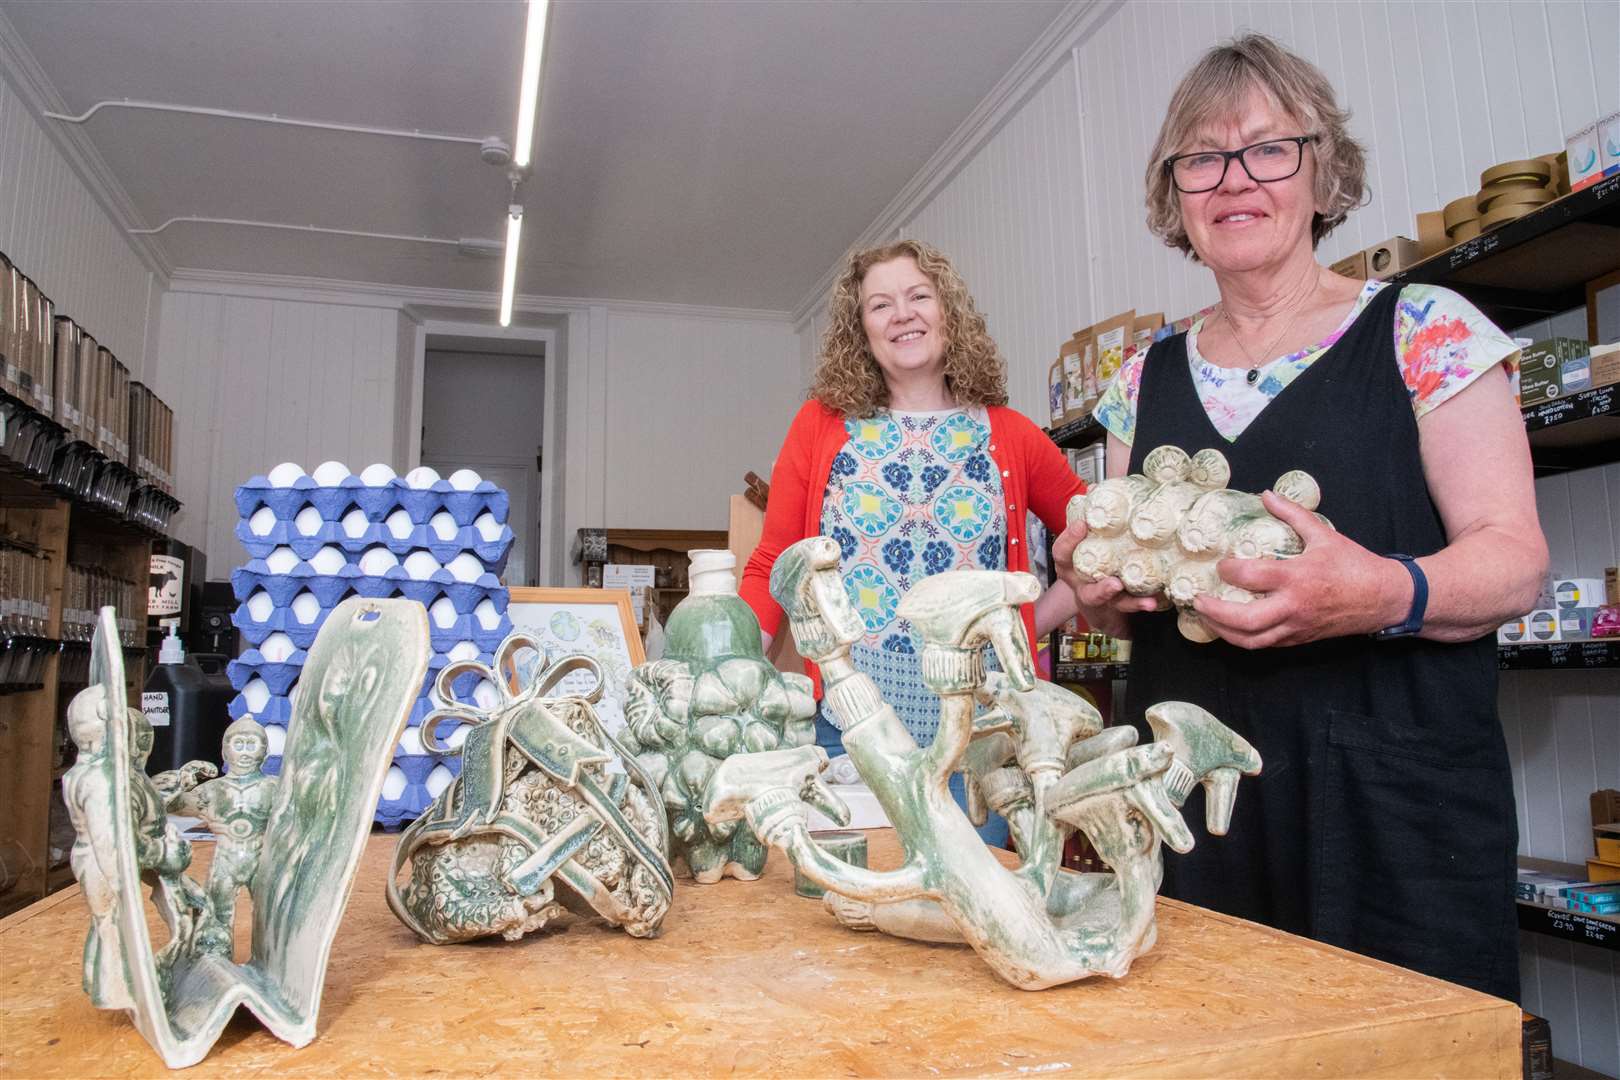 Jenny Ebdy (right), a sculptor from Kingston, is holding an exhibition based on single use plastics. The sculptures are currently on display at Alison Ruickbie's RE:store shop in Lossiemouth. Picture: Daniel Forsyth